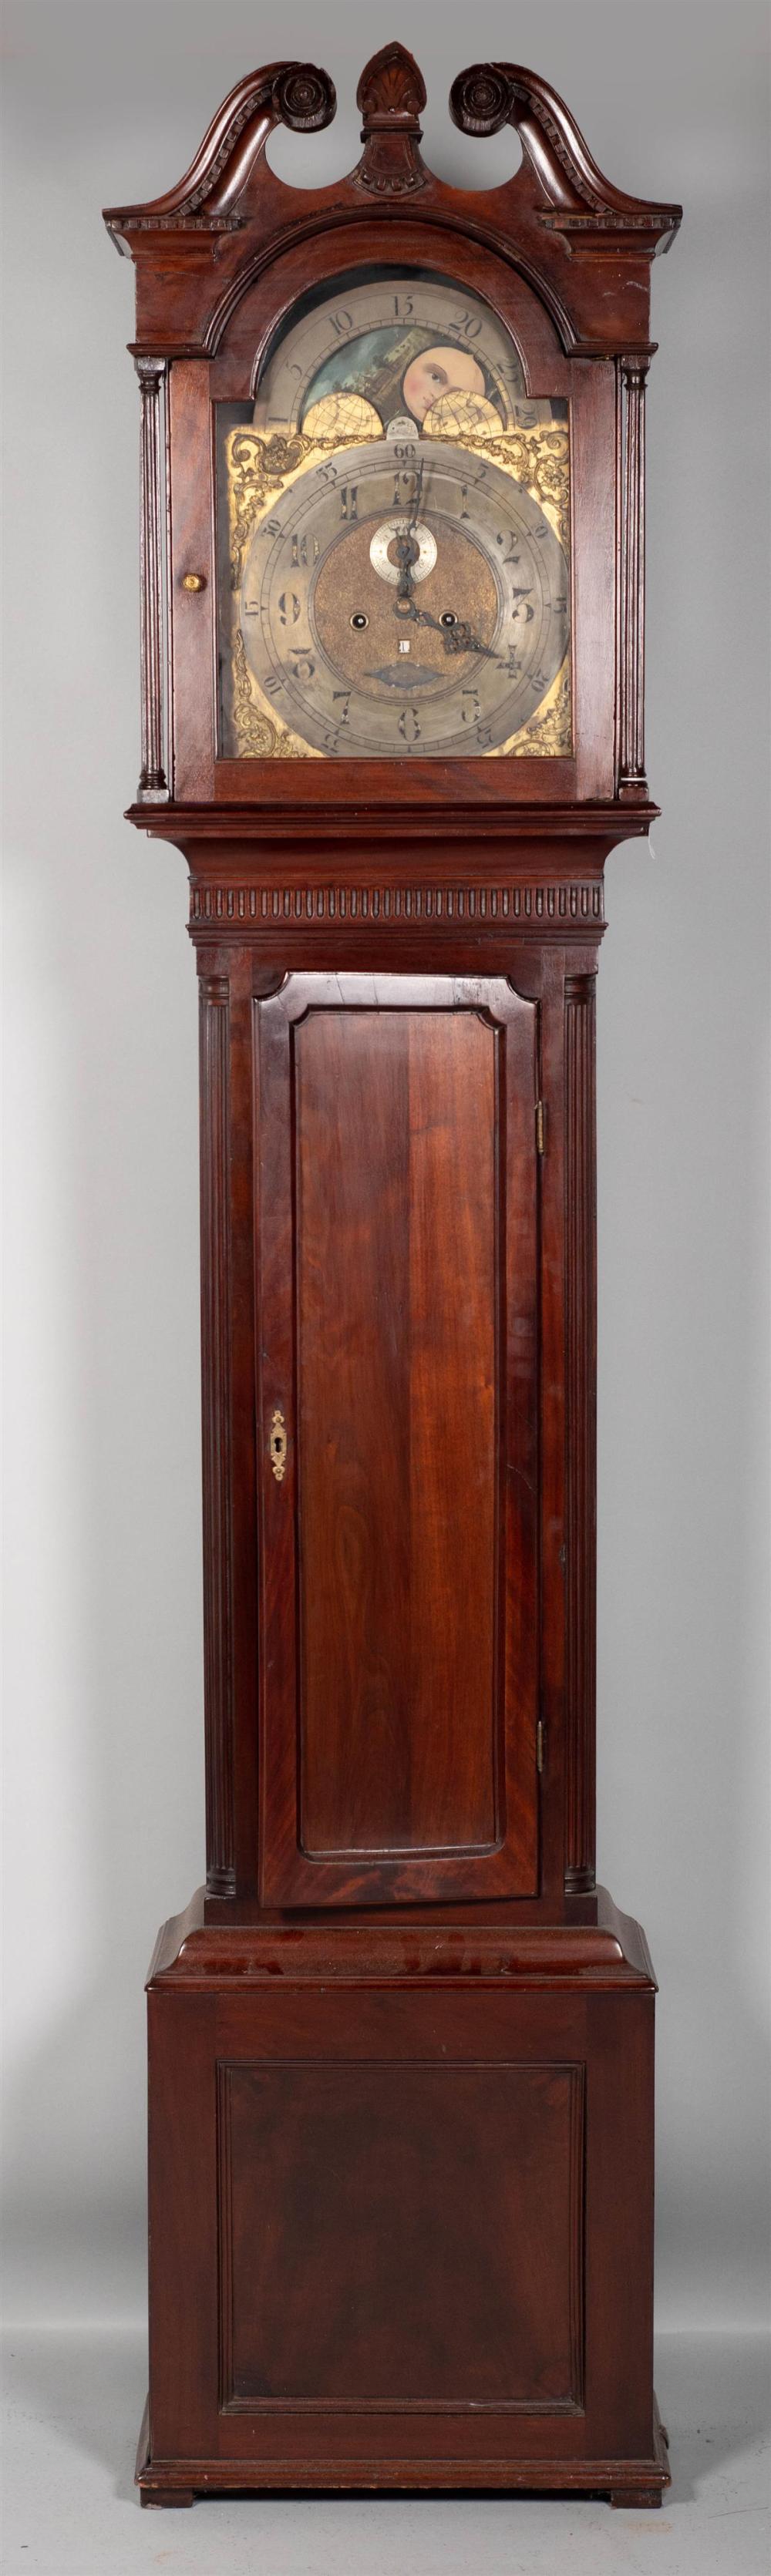 CHIPPENDALE STYLE MAHOGANY TALL 33aff0